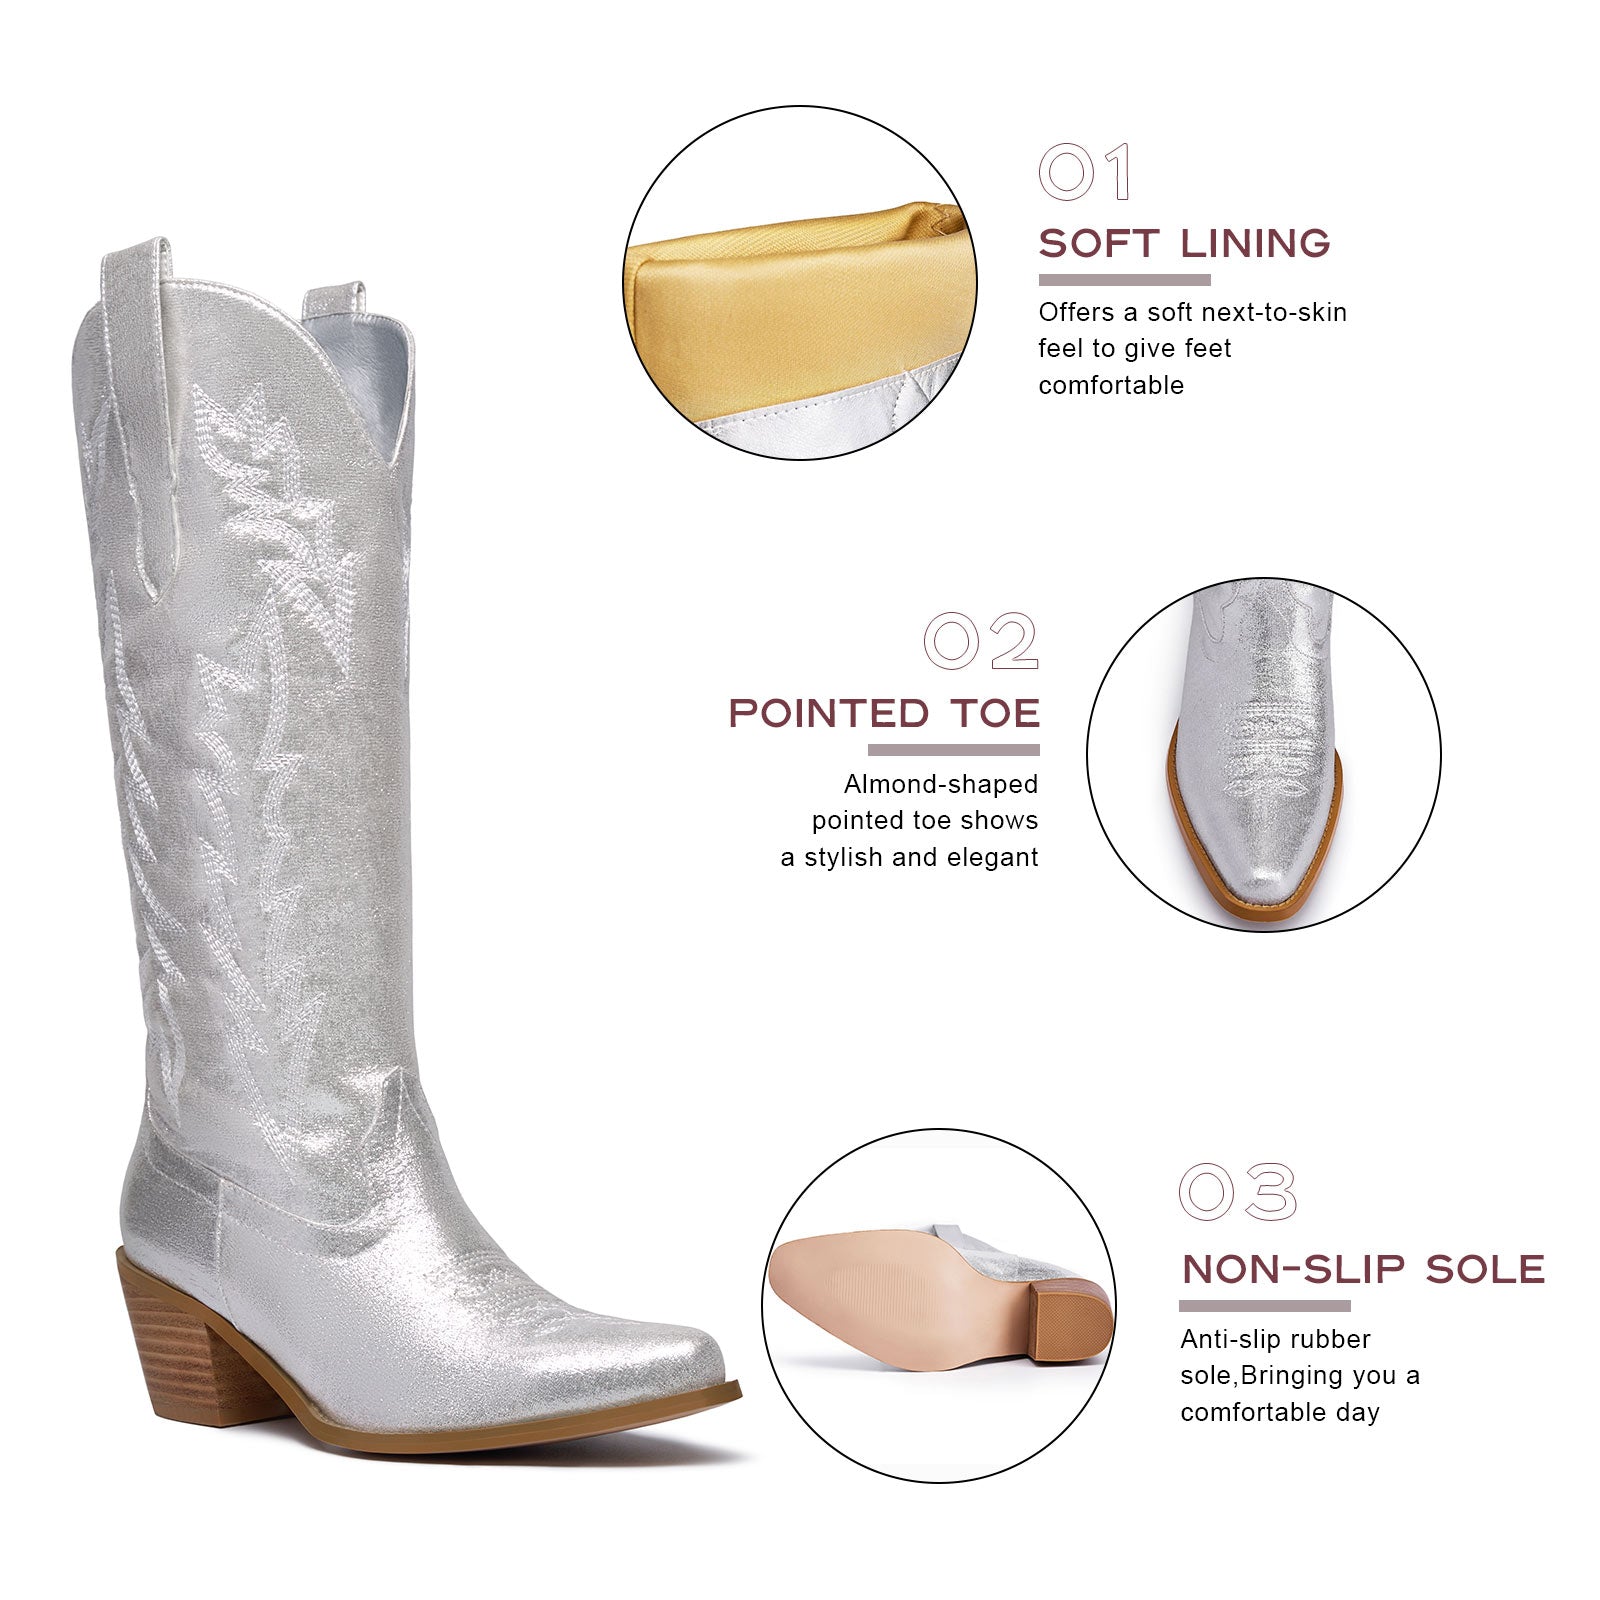 Metallic Embroidered Knee High Cowboy Boots